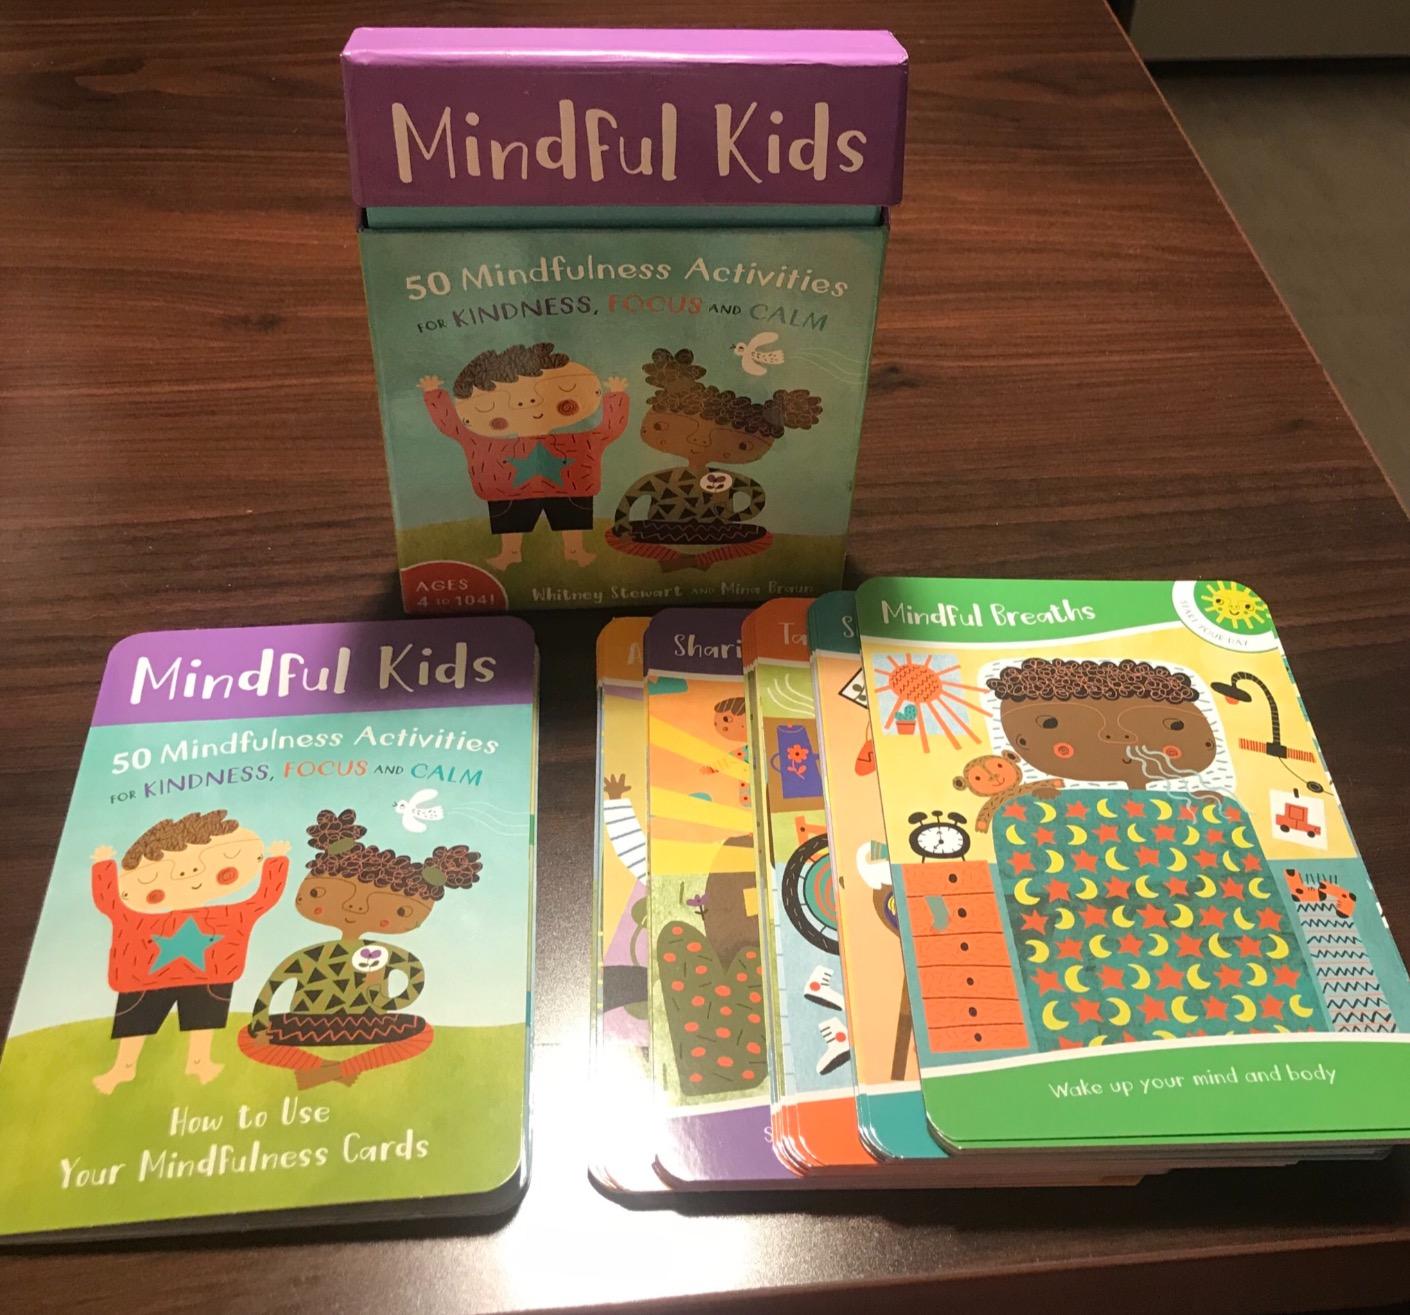 A deck of mindfulness cards for kids on a table as an example of an educational brain break.